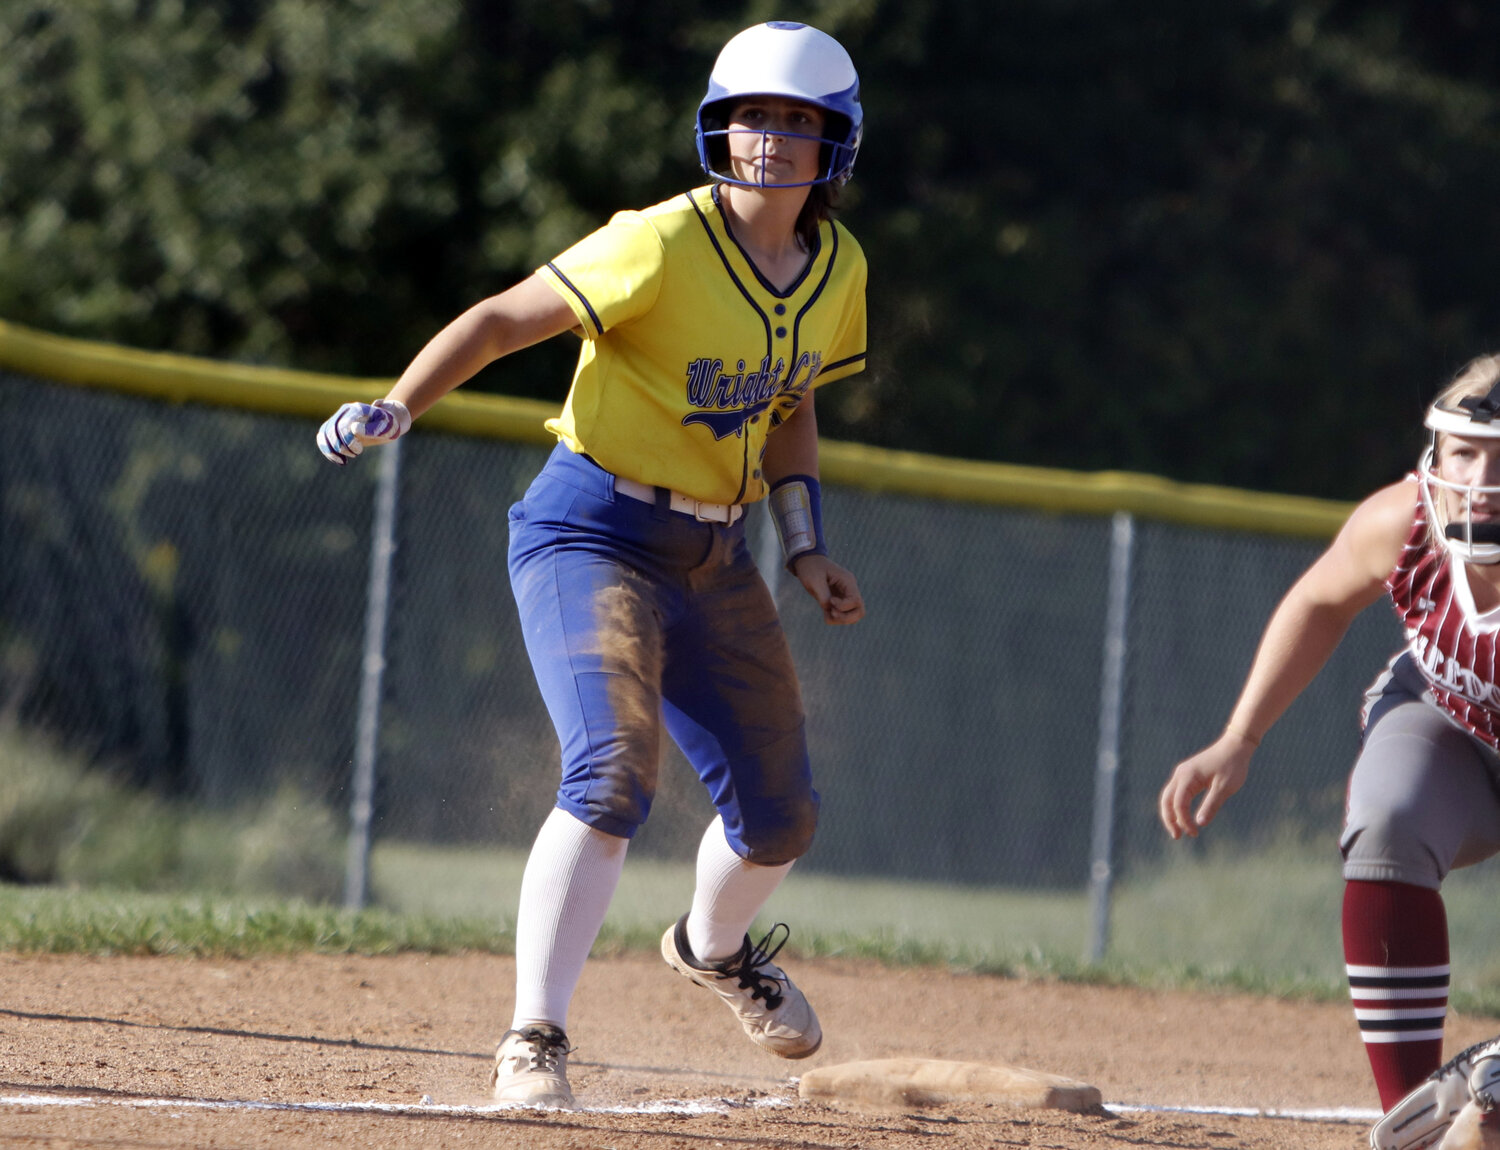 Ava Swaringen takes a lead off of third base during Wright City's game against Louisiana.